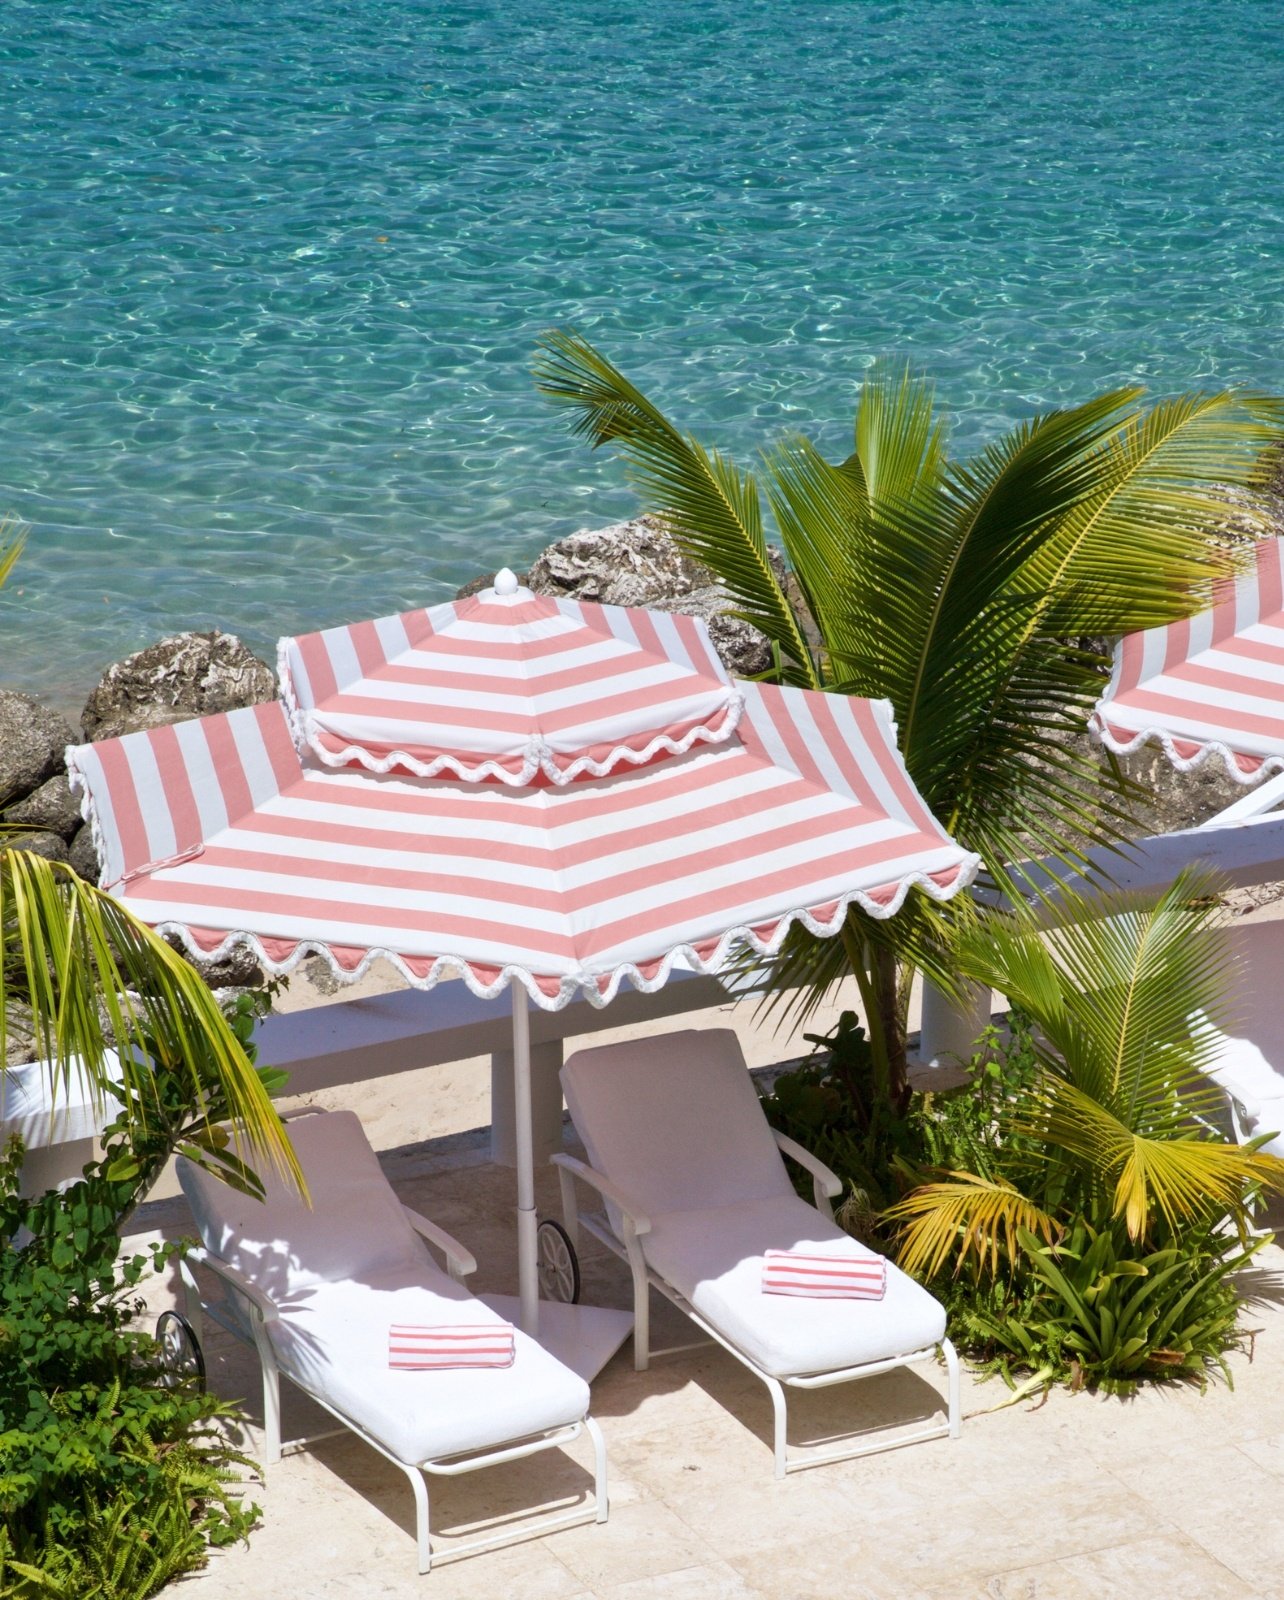 Two beach chair perched abover the water with a pink and white striped umbrella and matching towels